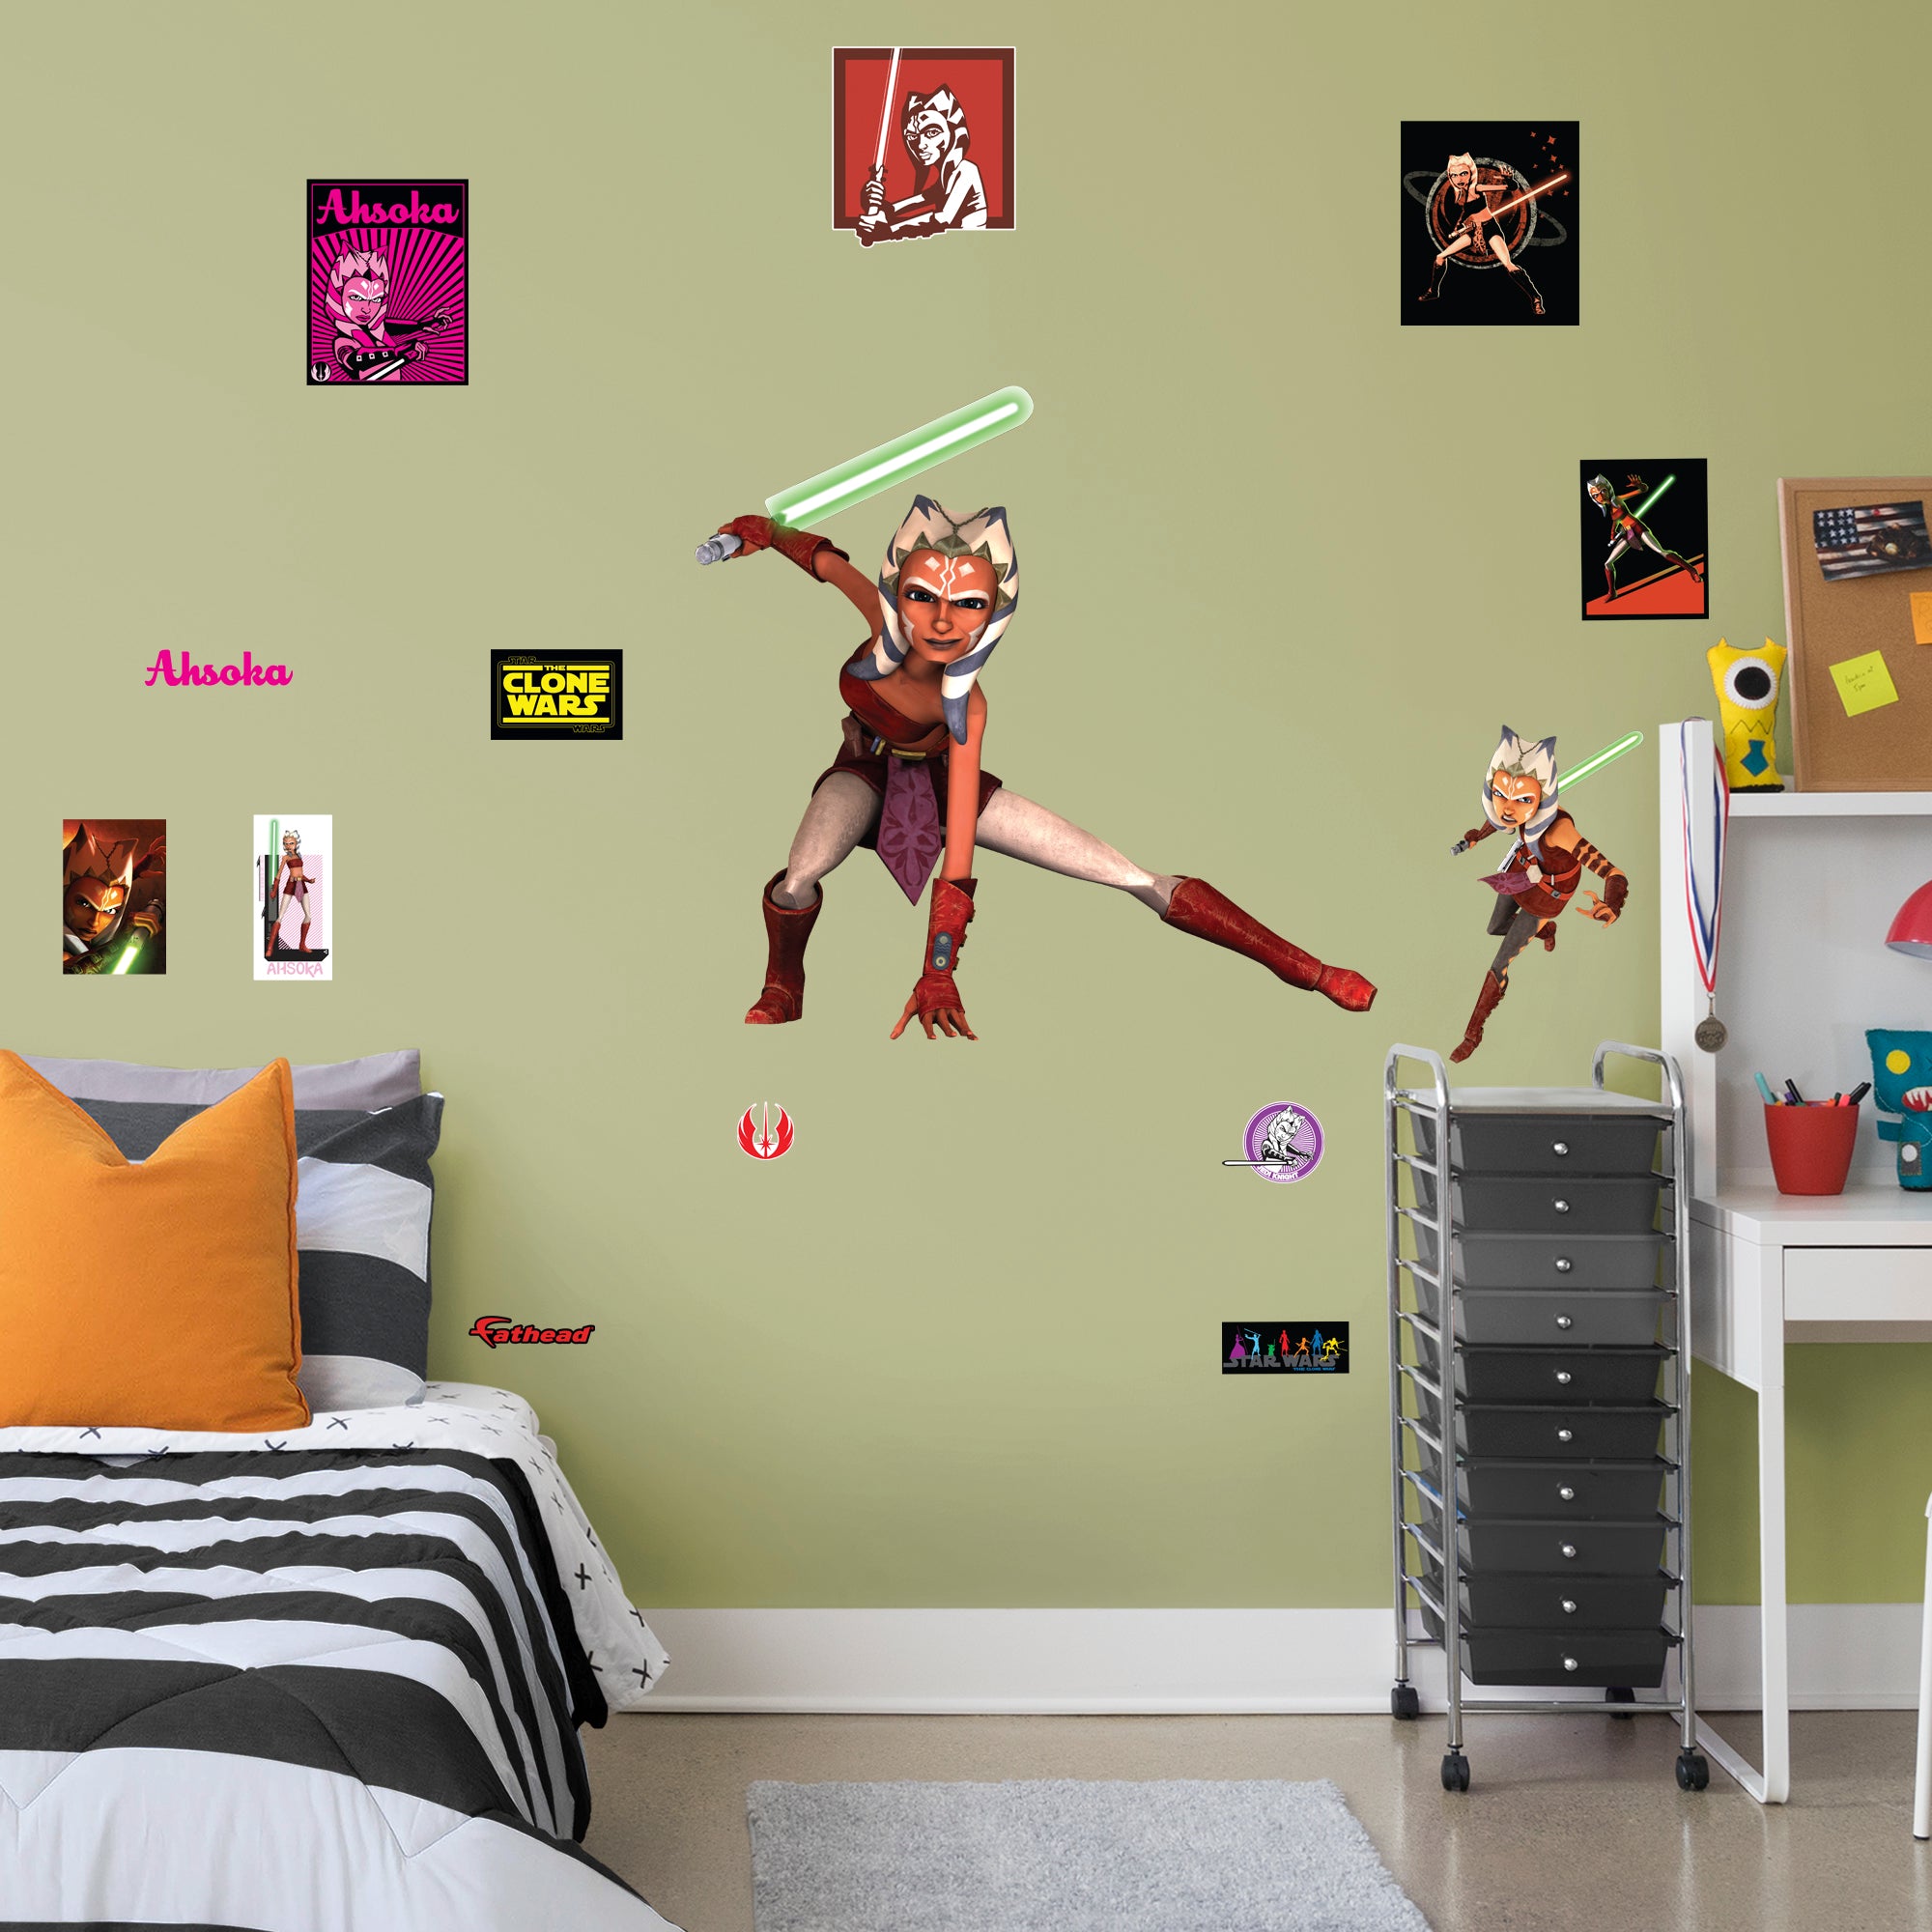 Ahsoka Tano - Star Wars: Clone Wars - Officially Licensed Removable Wall Decal Life-Size Character + 13 Decals by Fathead | Viny